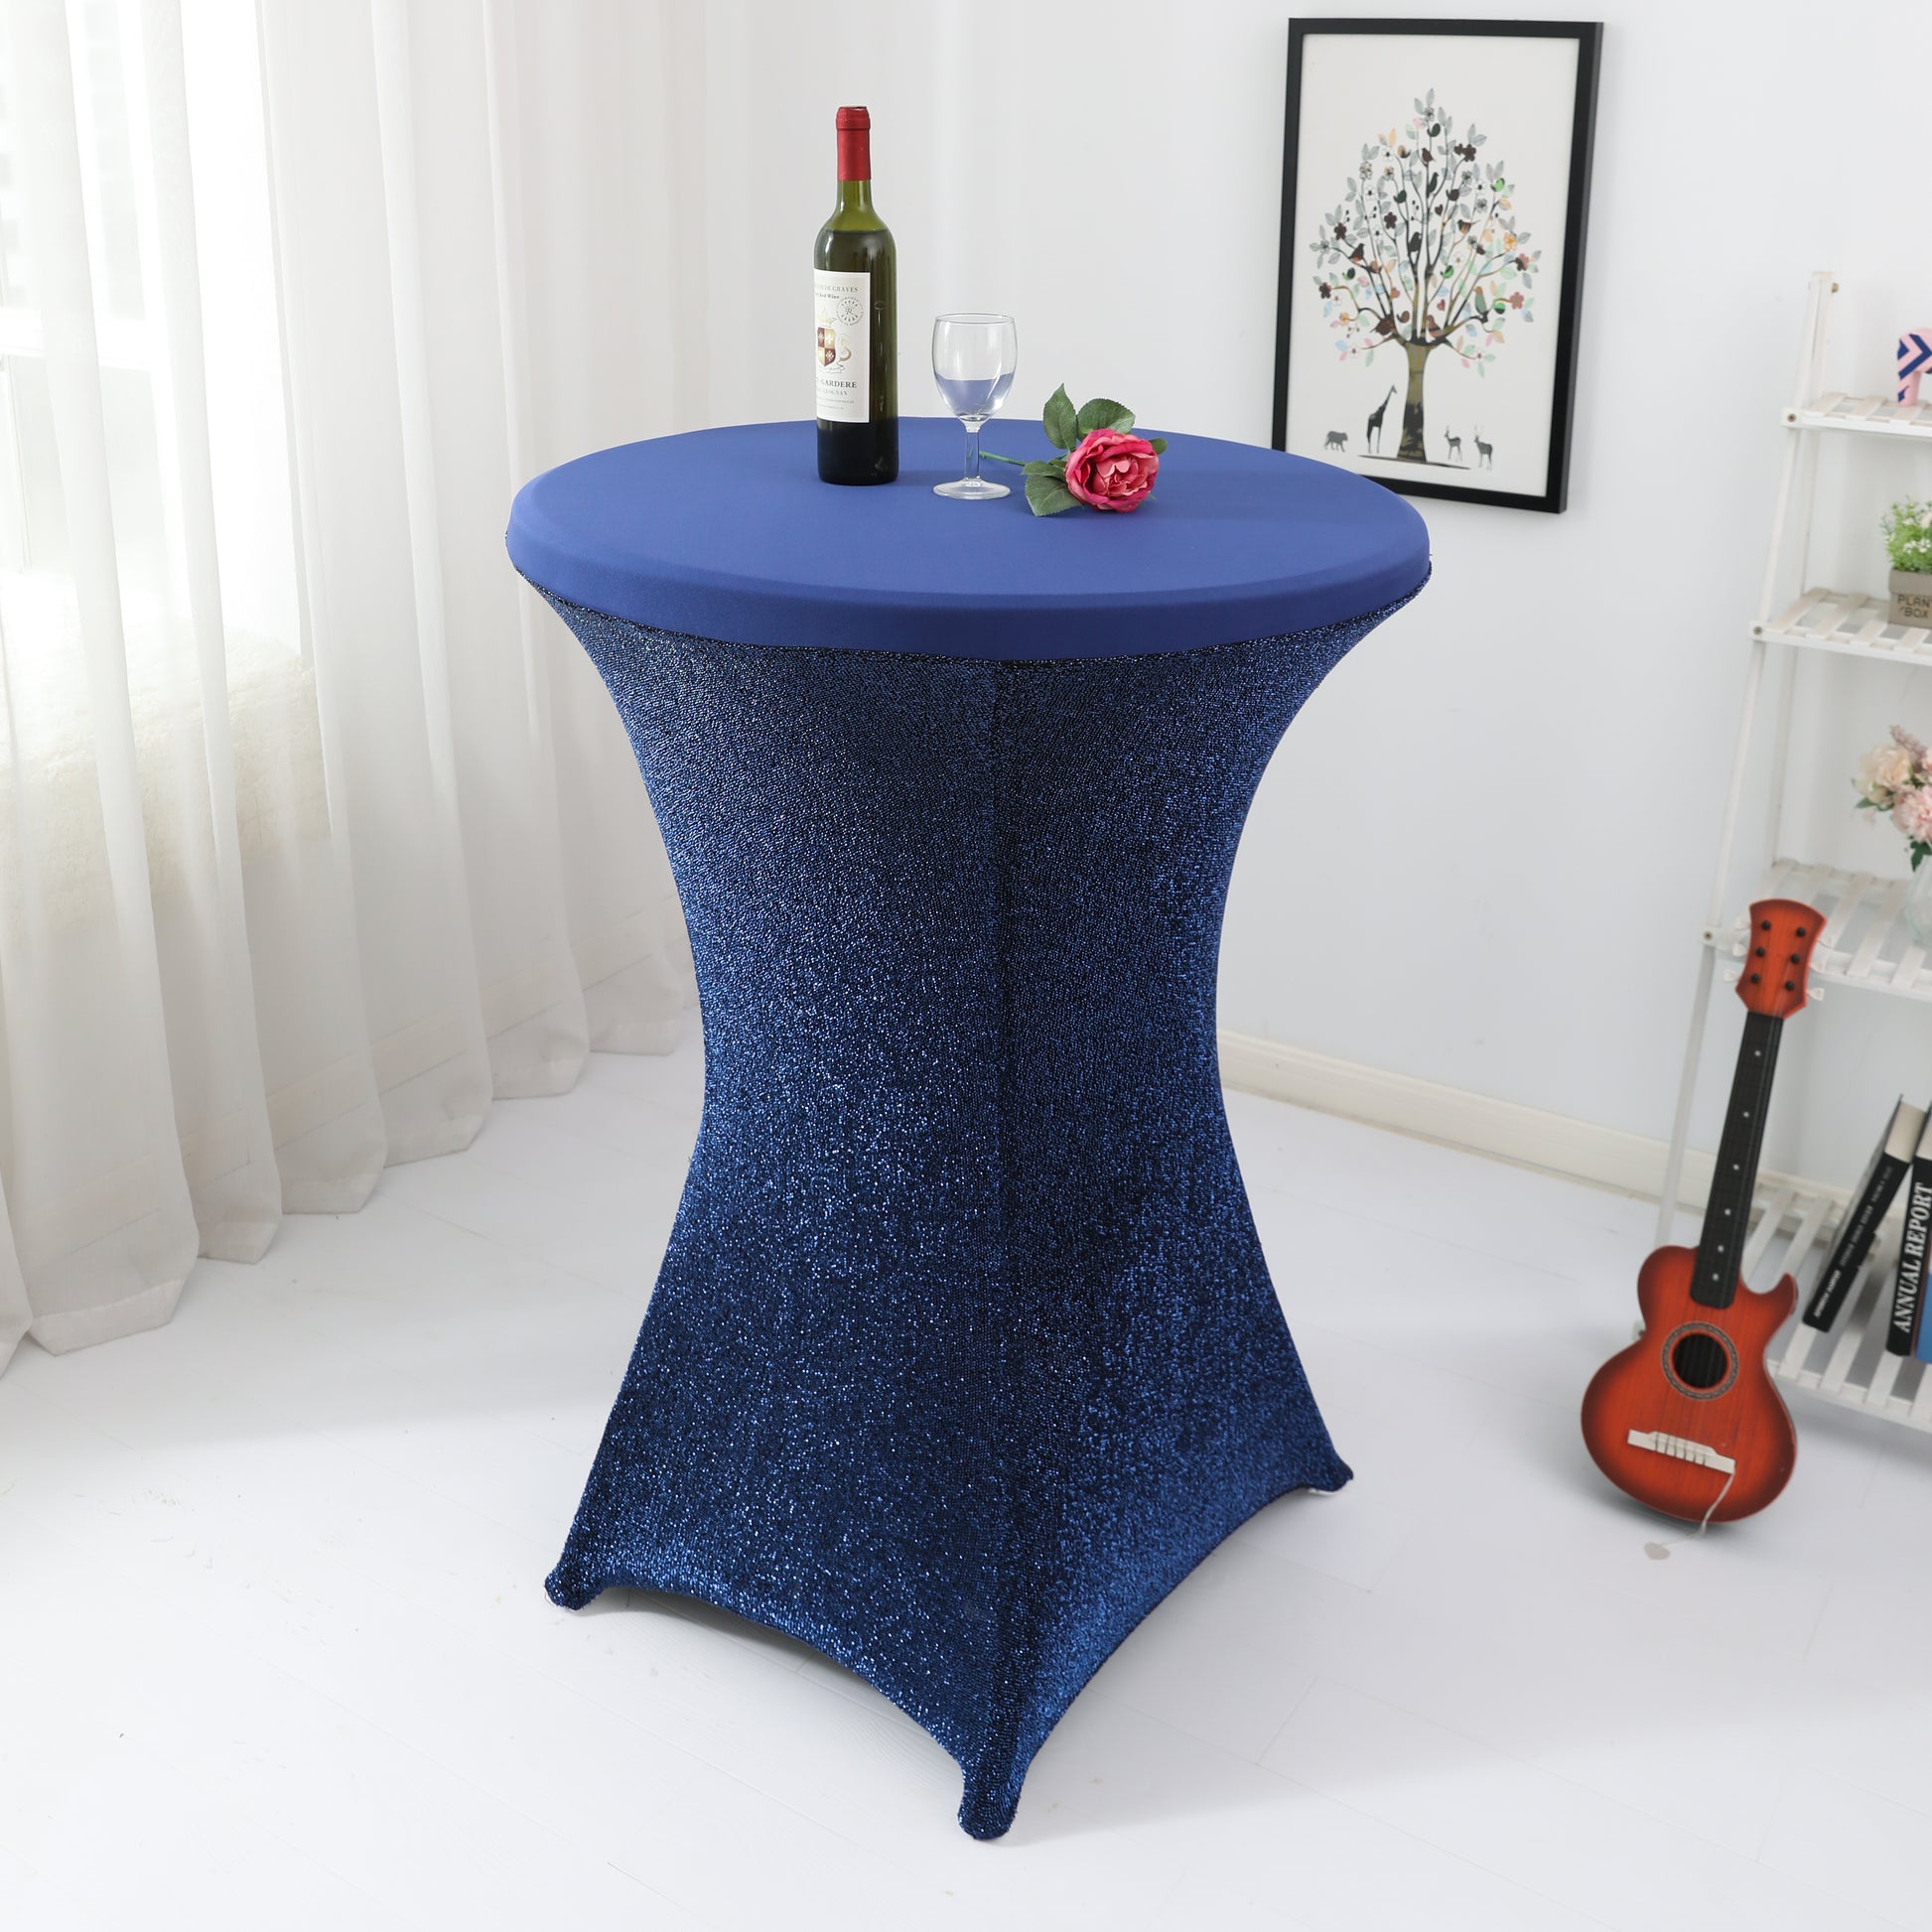 Shimmer Tinsel Spandex Cocktail Table Cover 30"-32" Round - Navy Blue